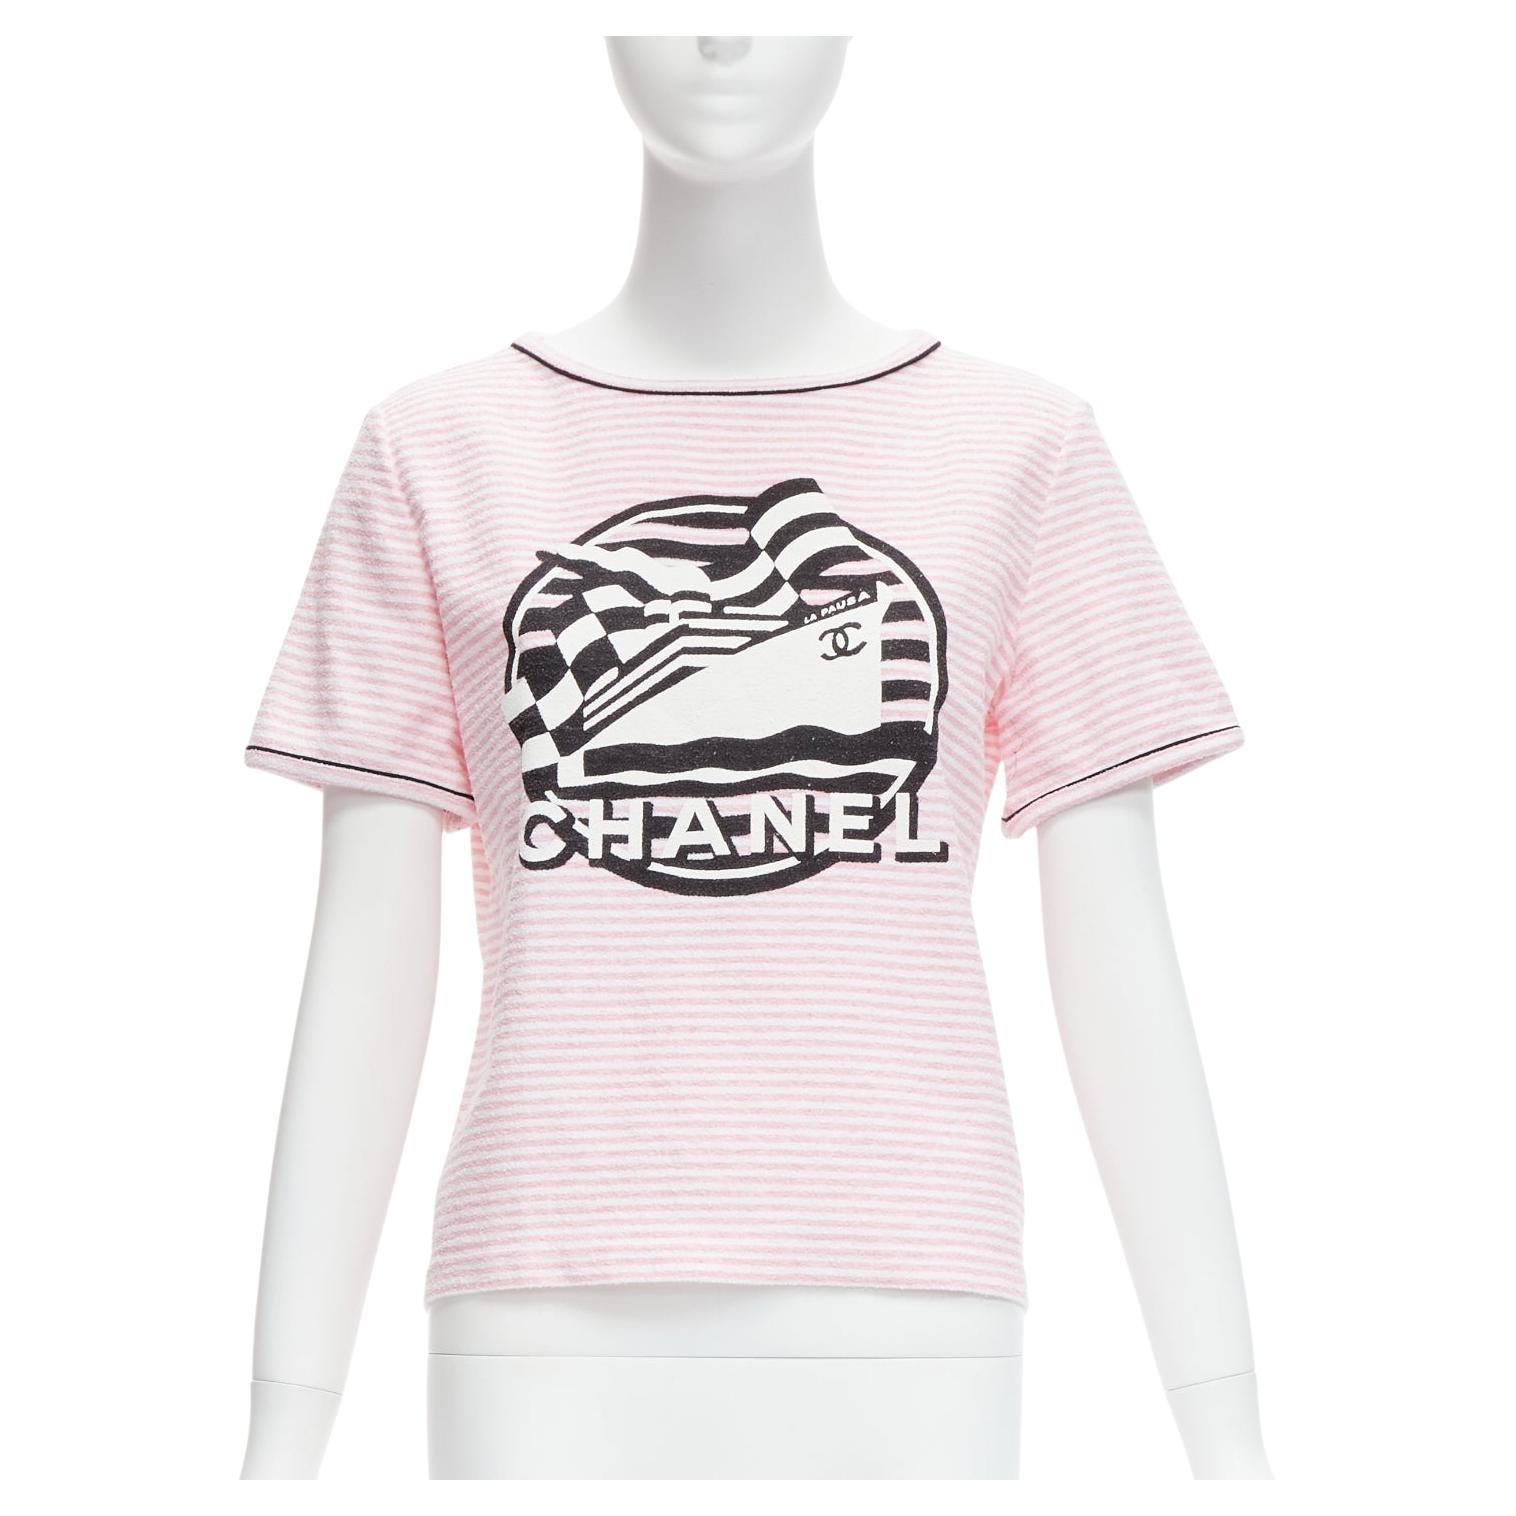 Chanel Striped T Shirt - 4 For Sale on 1stDibs  chanel striped shirt,  chanel t shirt, chanel stripe top